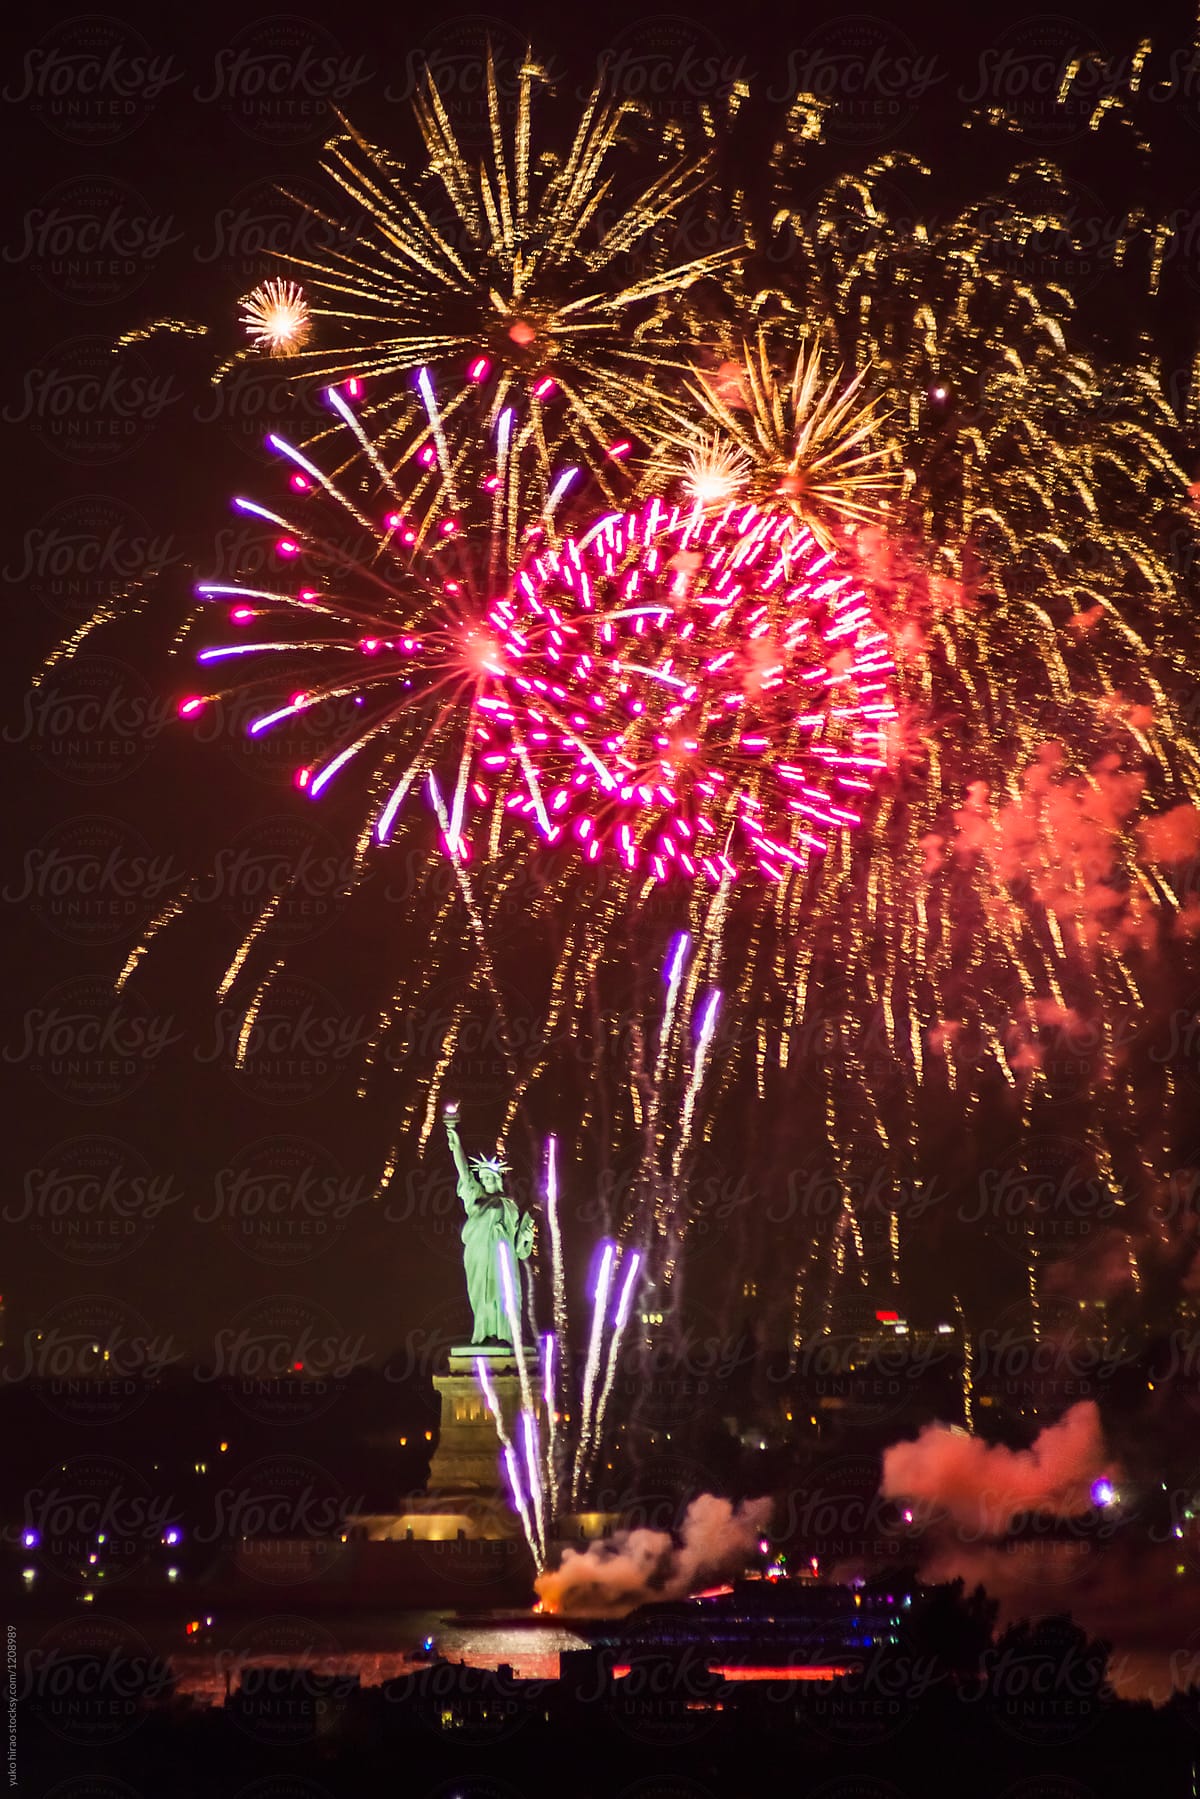 Fireworks with the Statue of Liberty in New York